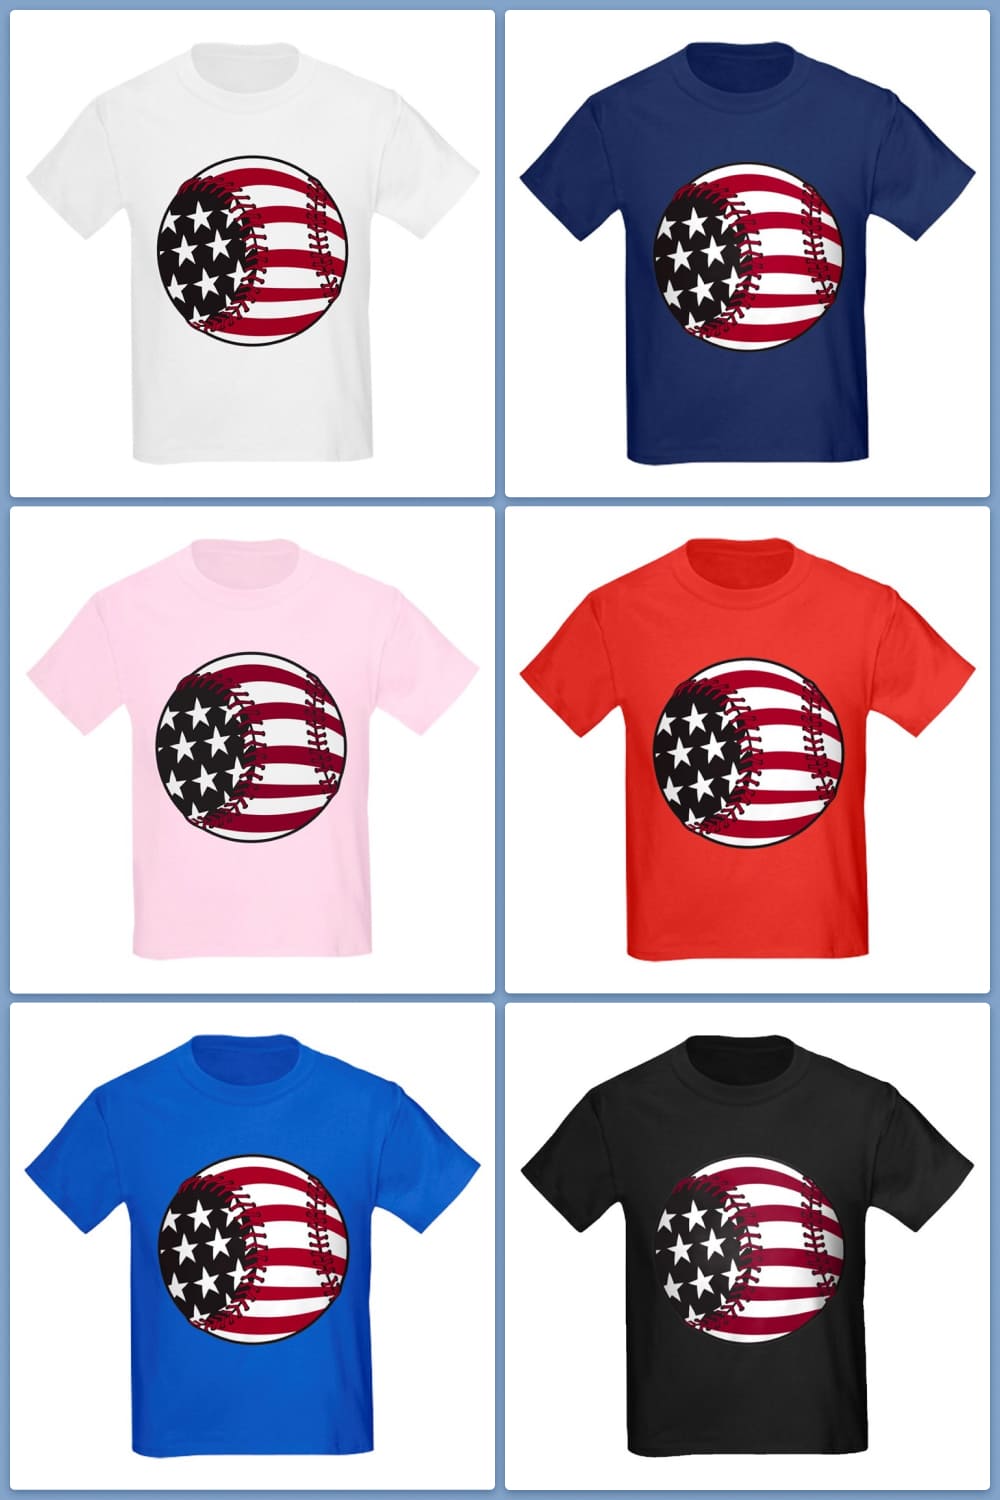 Collage of colorful t-shirts with colored baseball ball.